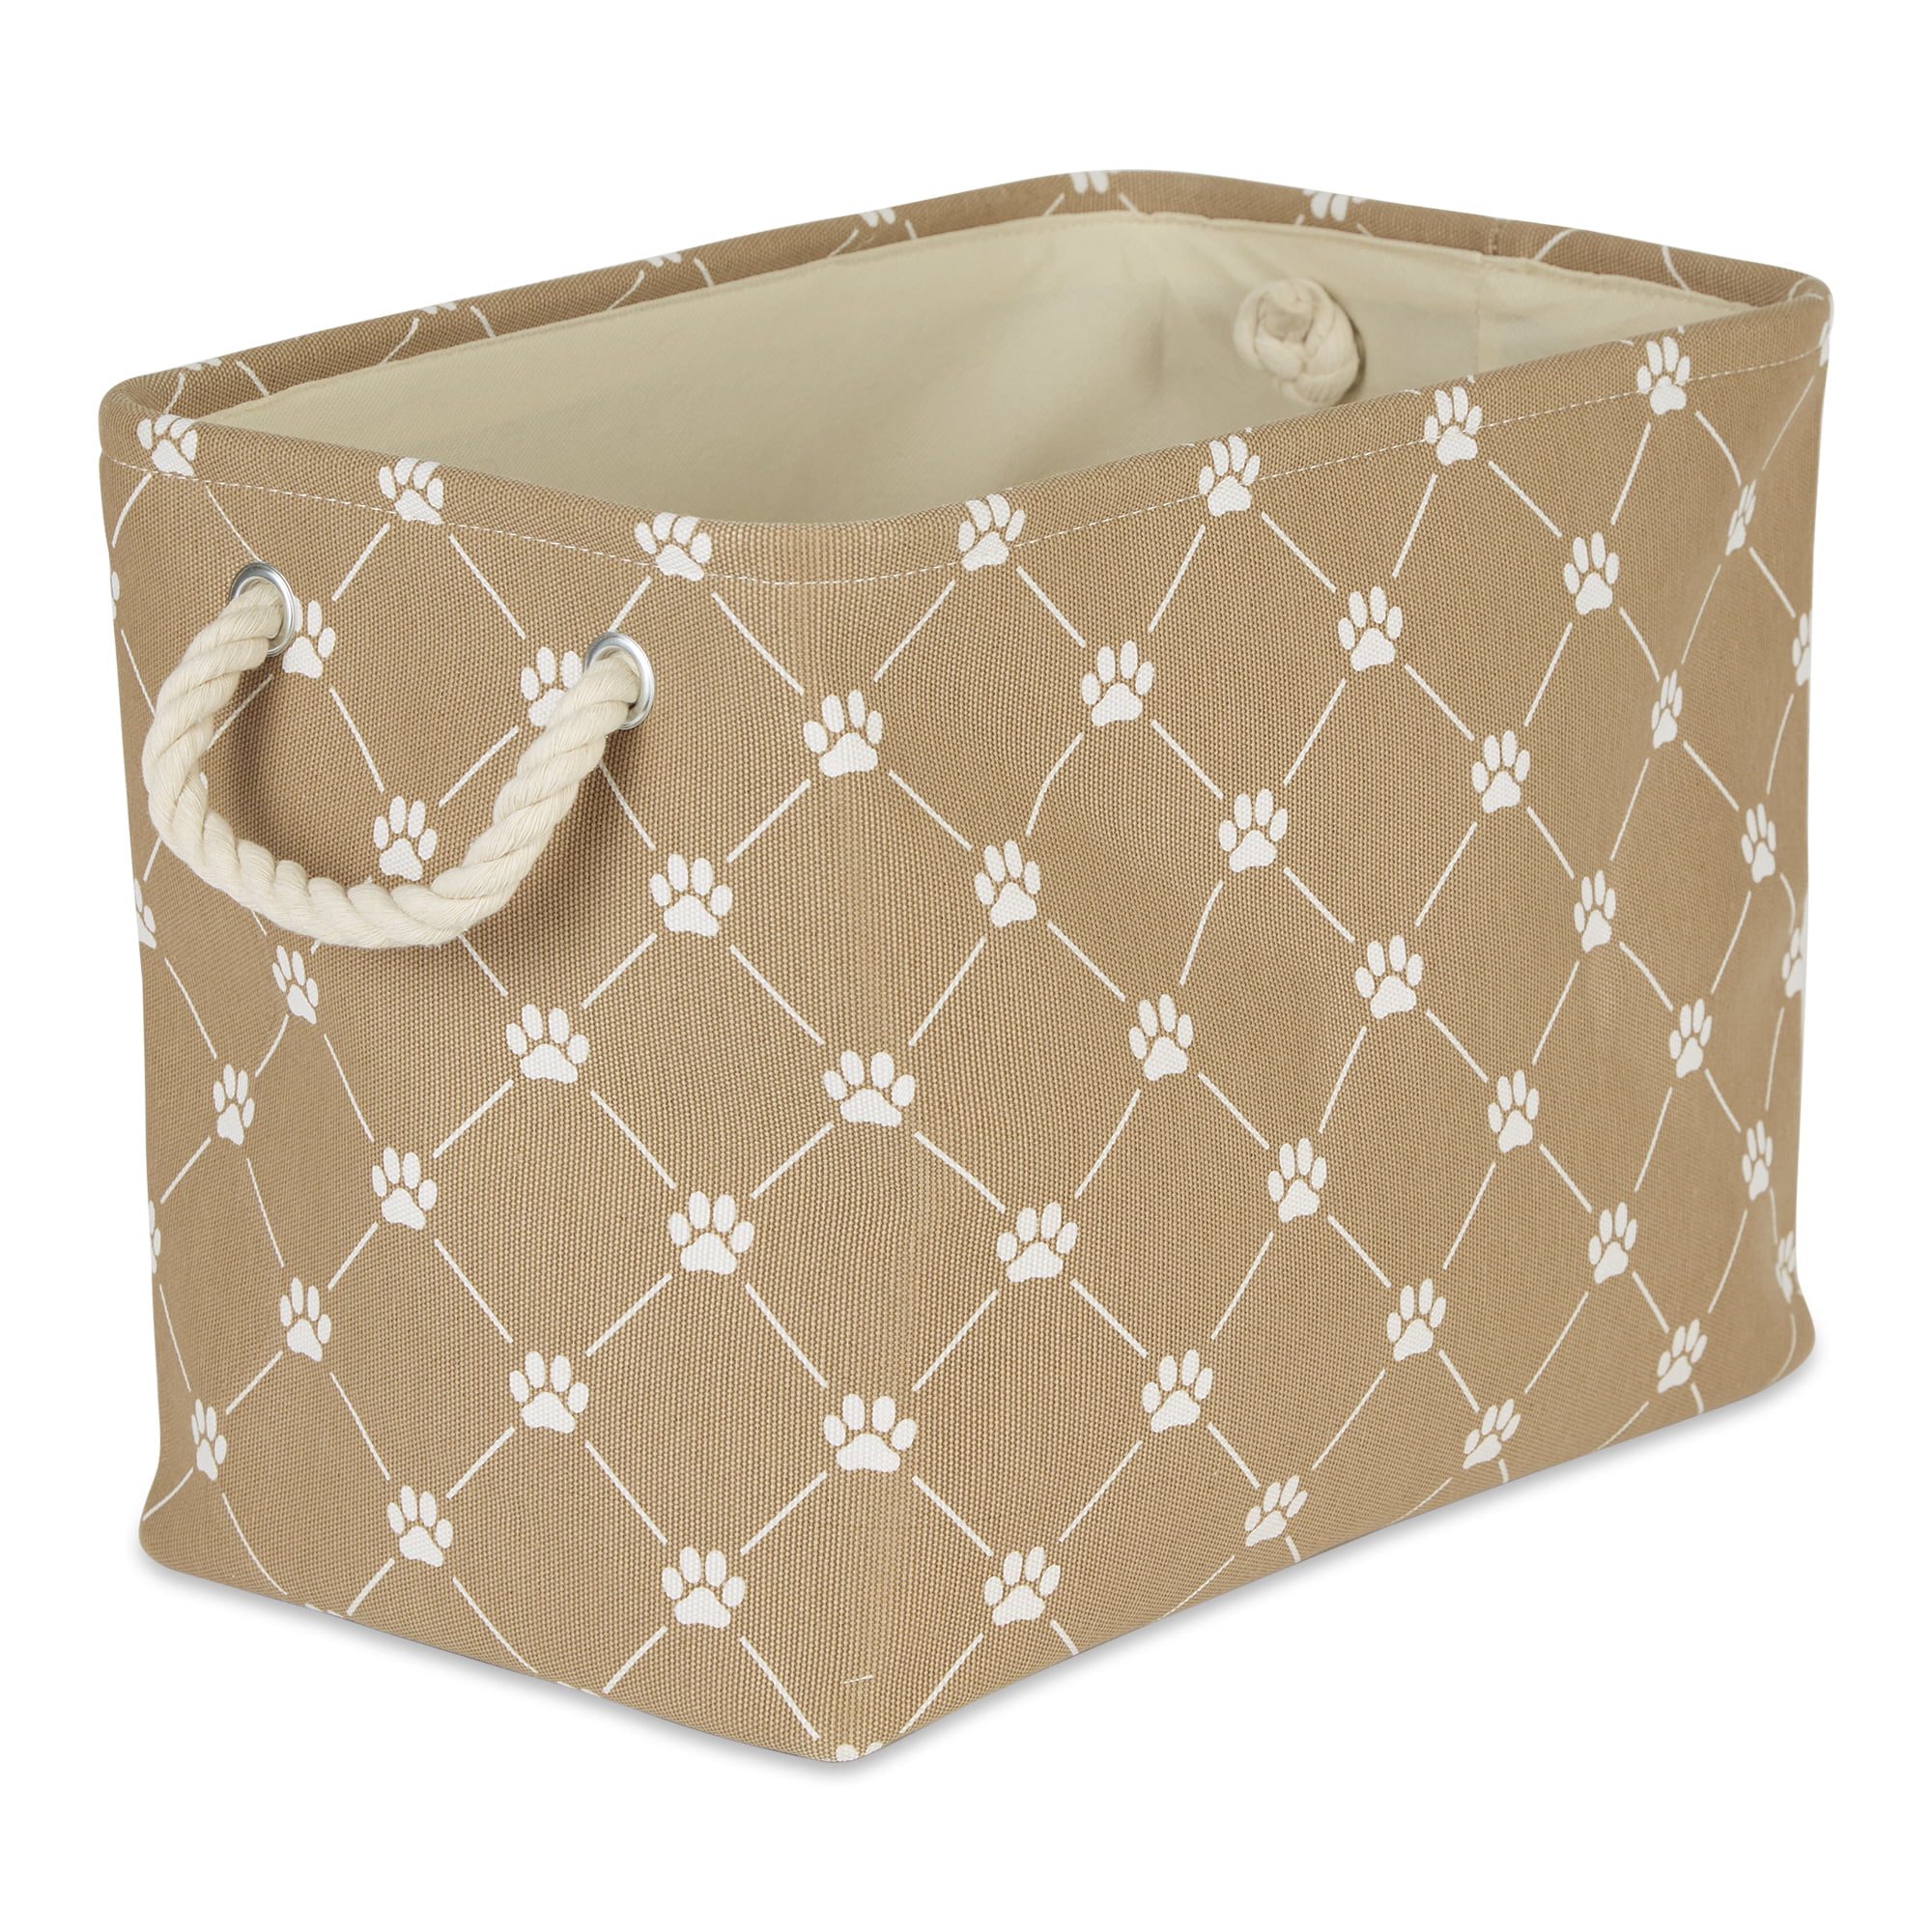 Picture of Design Imports CAMZ14241 Polyester Trellis Paw Rectangle Pet Bin, Taupe